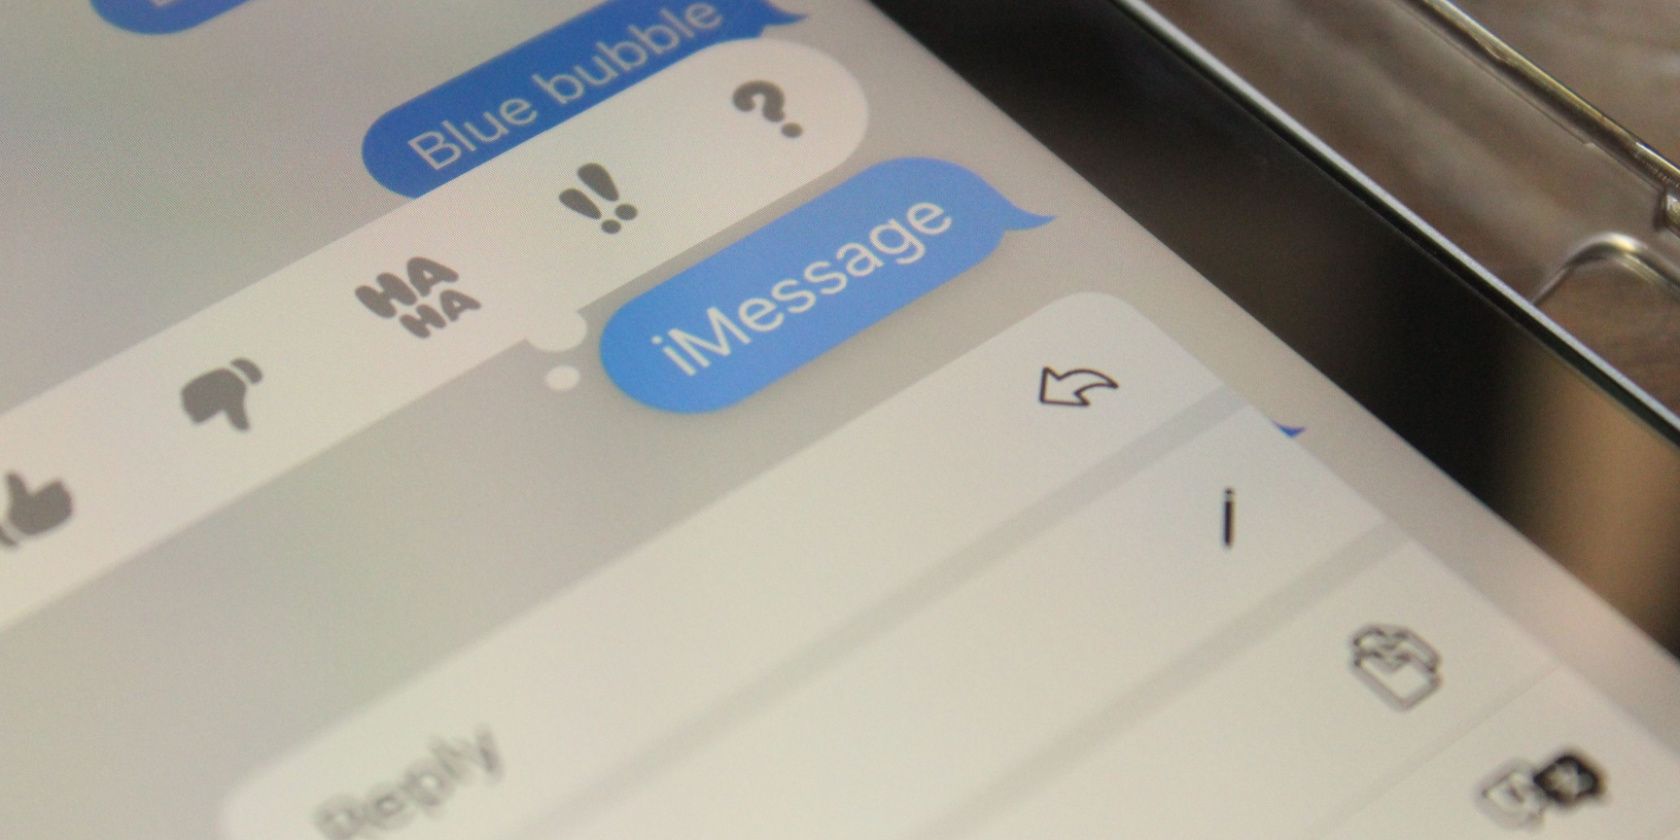 iMessage on iPhone showing blue bubbles and reactions